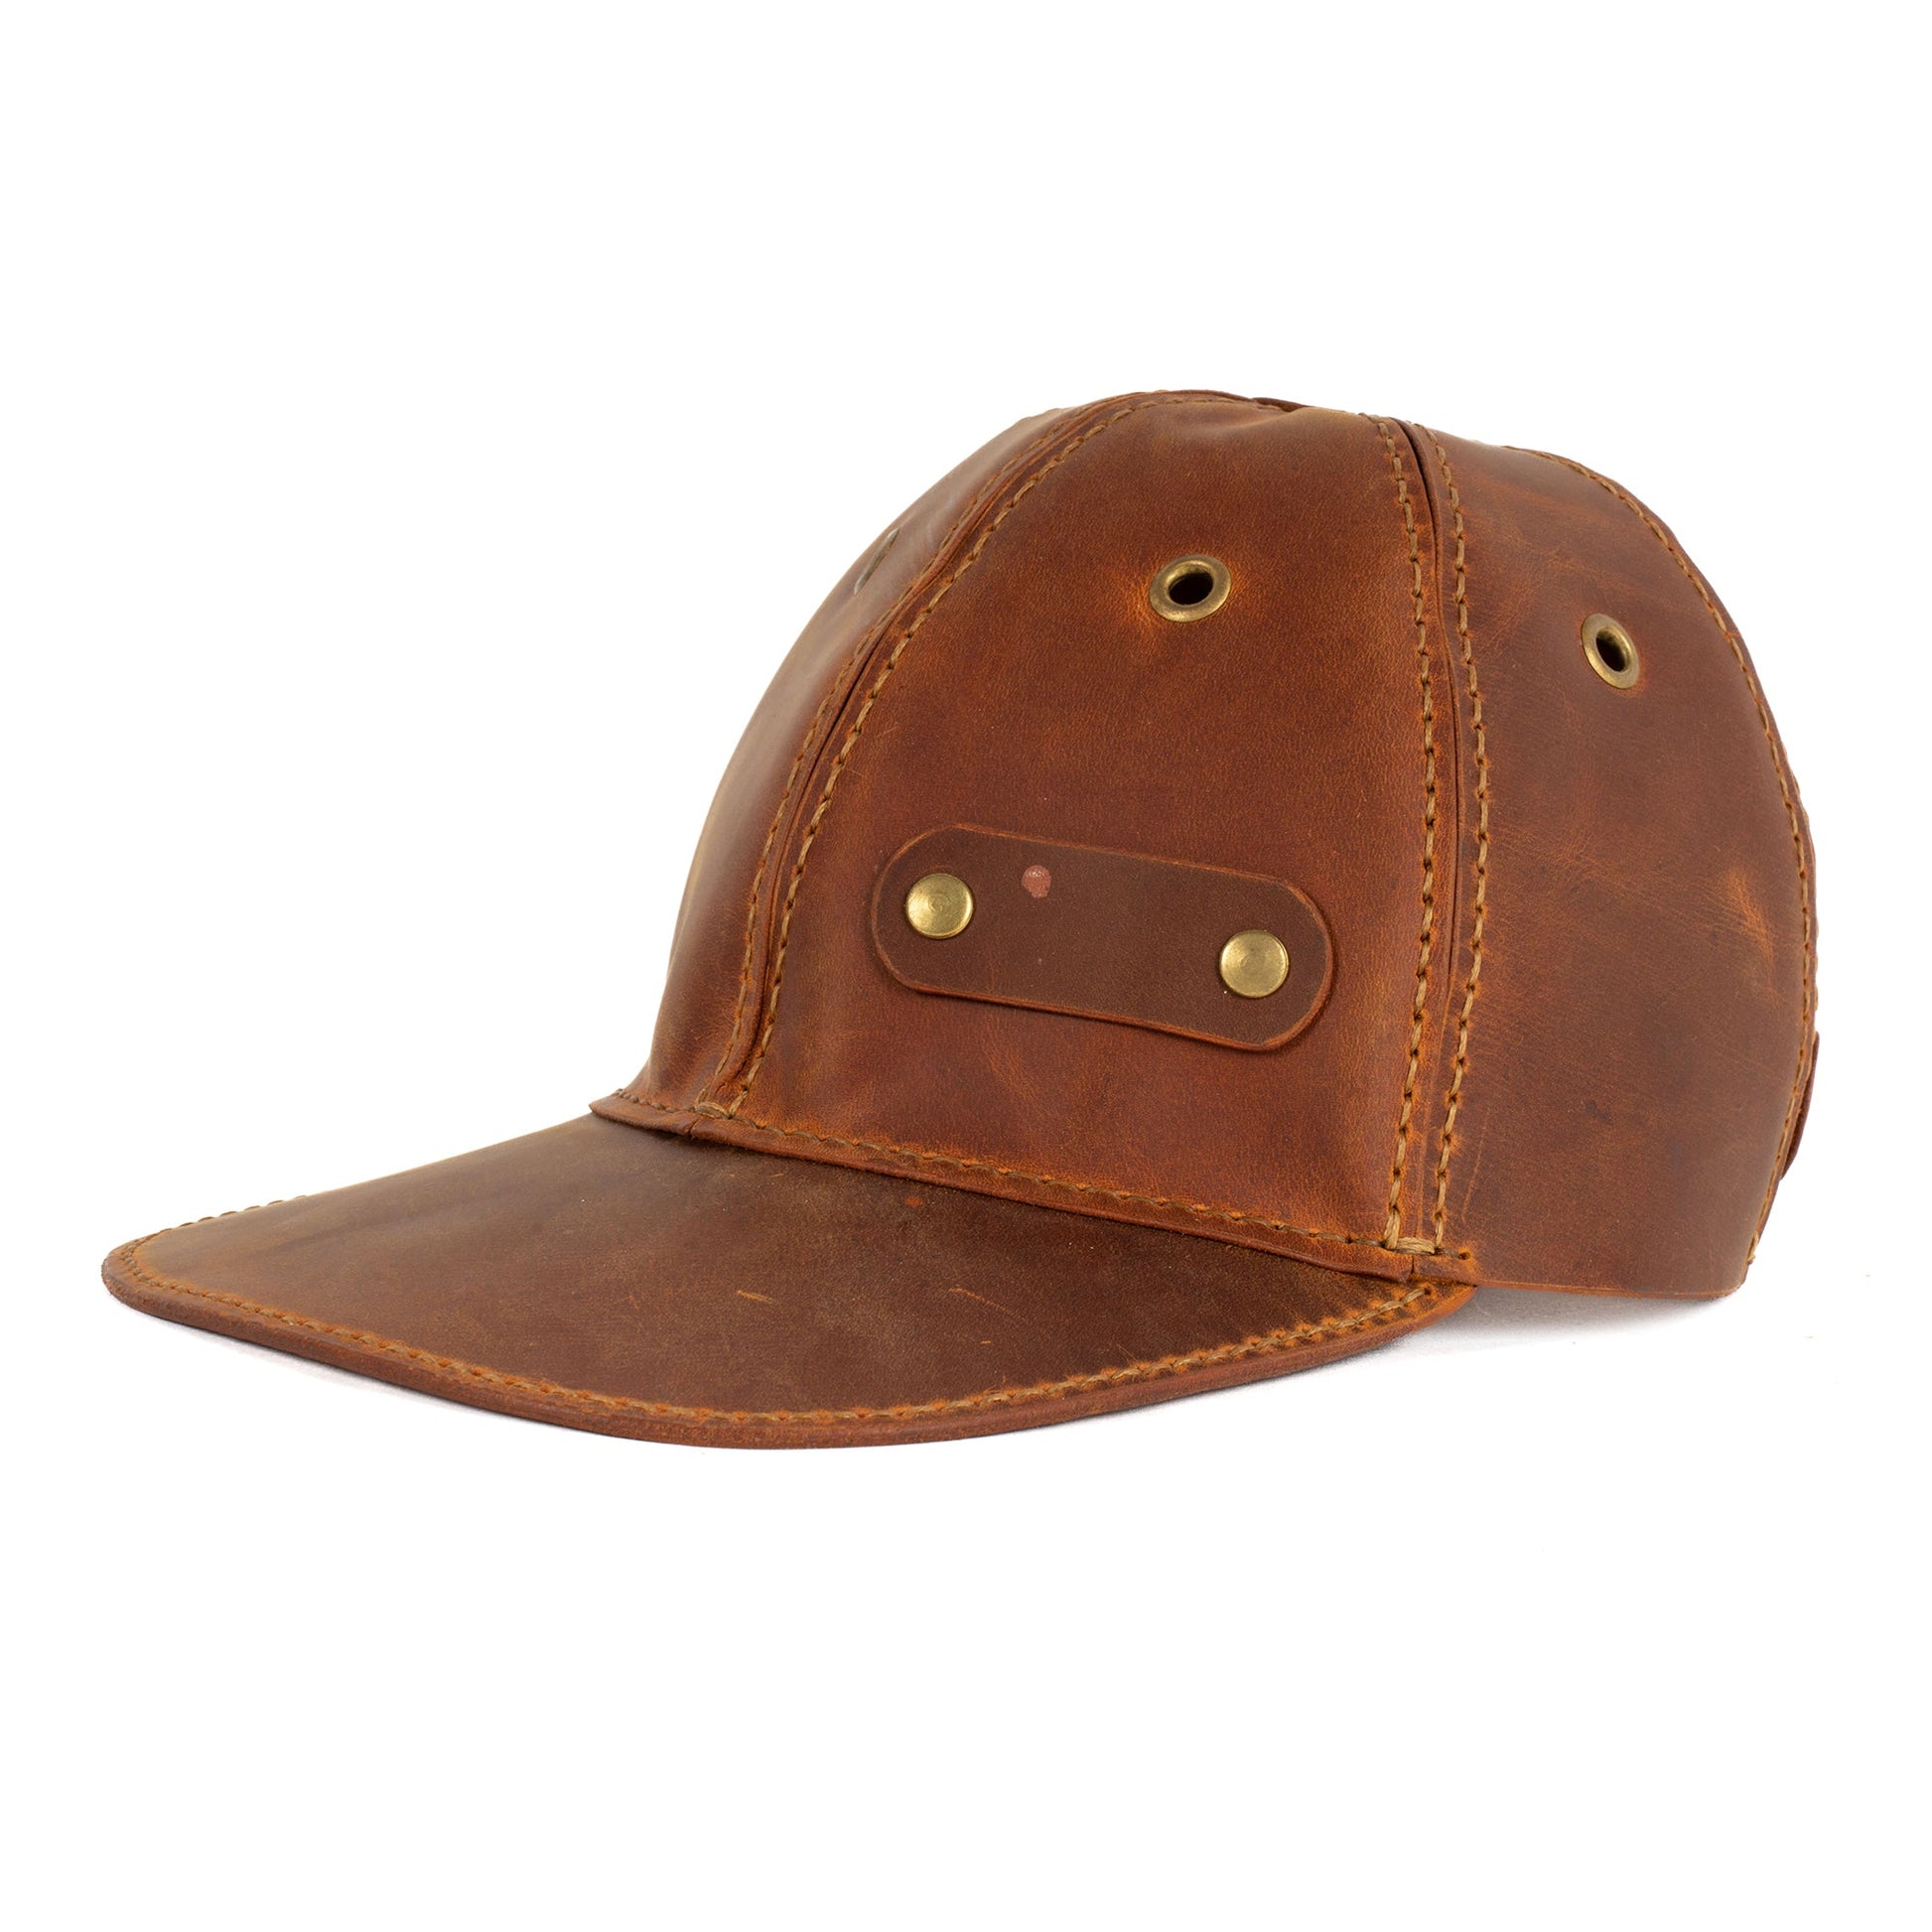 Maui Tan Leather Hat - Accessories Zengoda Shop online from Artisan Brands